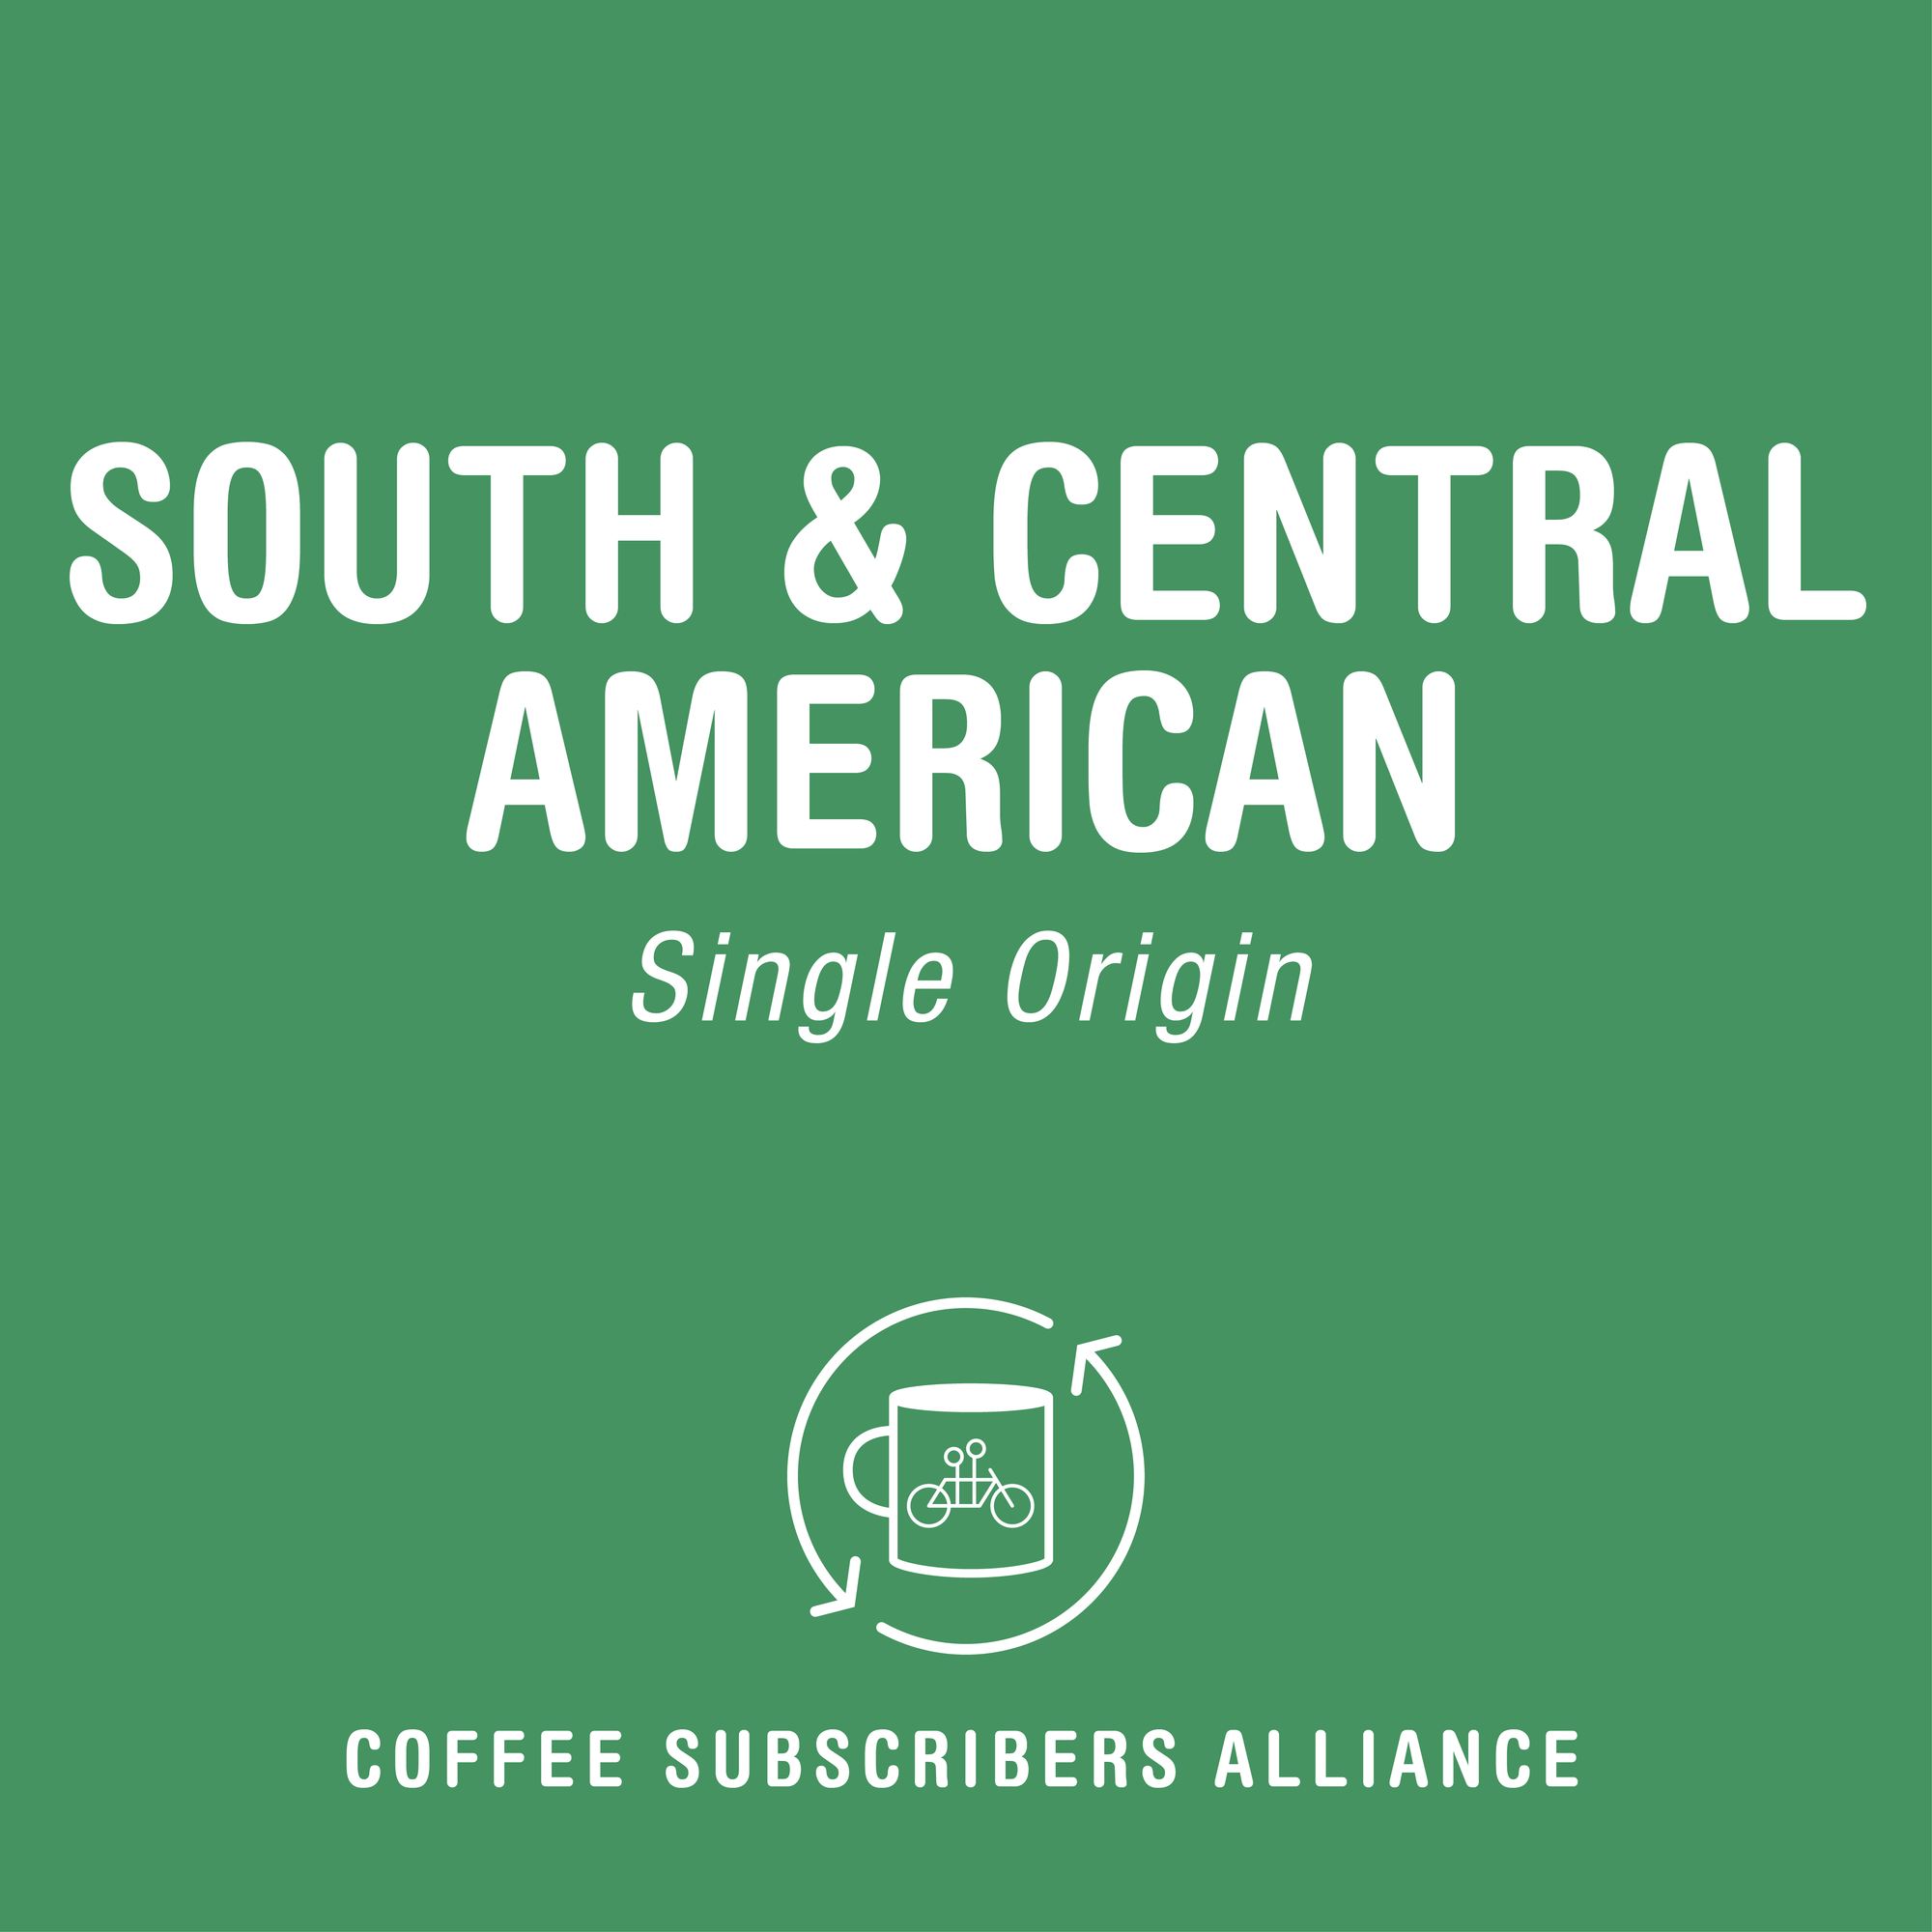 Green background with text saying "South & Central American Subscription Gift - 2 Weeks x 3" and logo of Tandem Coffee Roasters featuring a bicycle on a coffee cup.